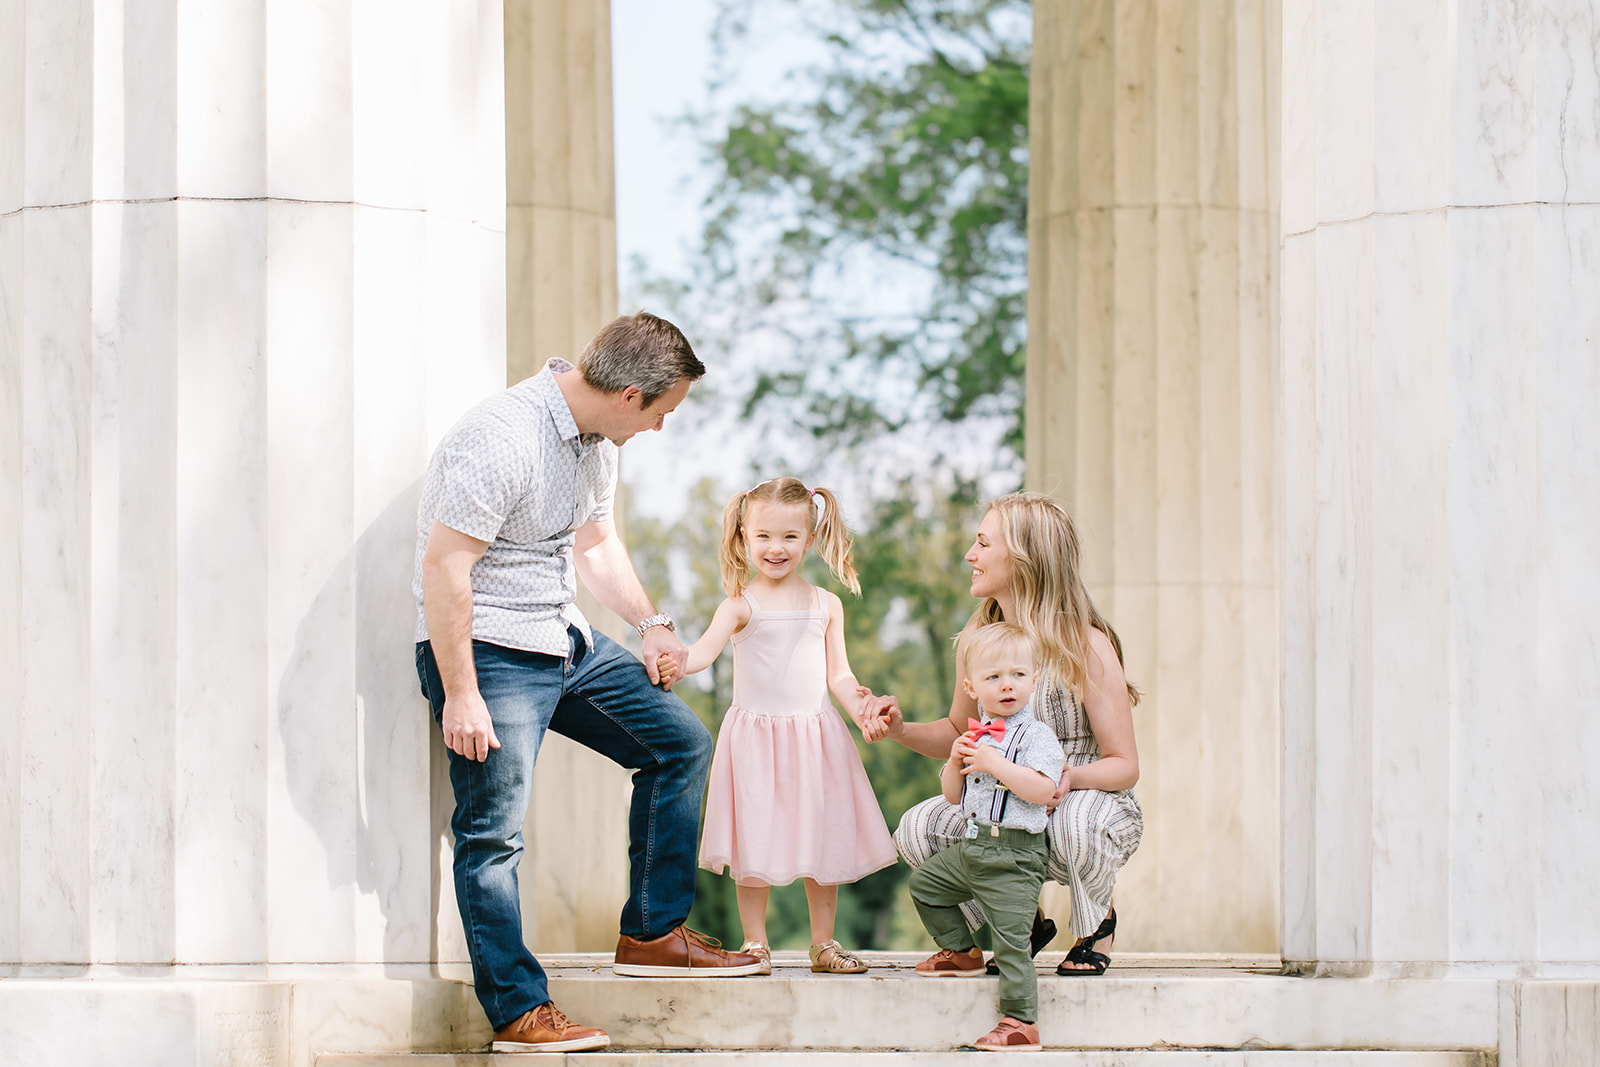 Mom and dad with their son and daughter laughing near columns